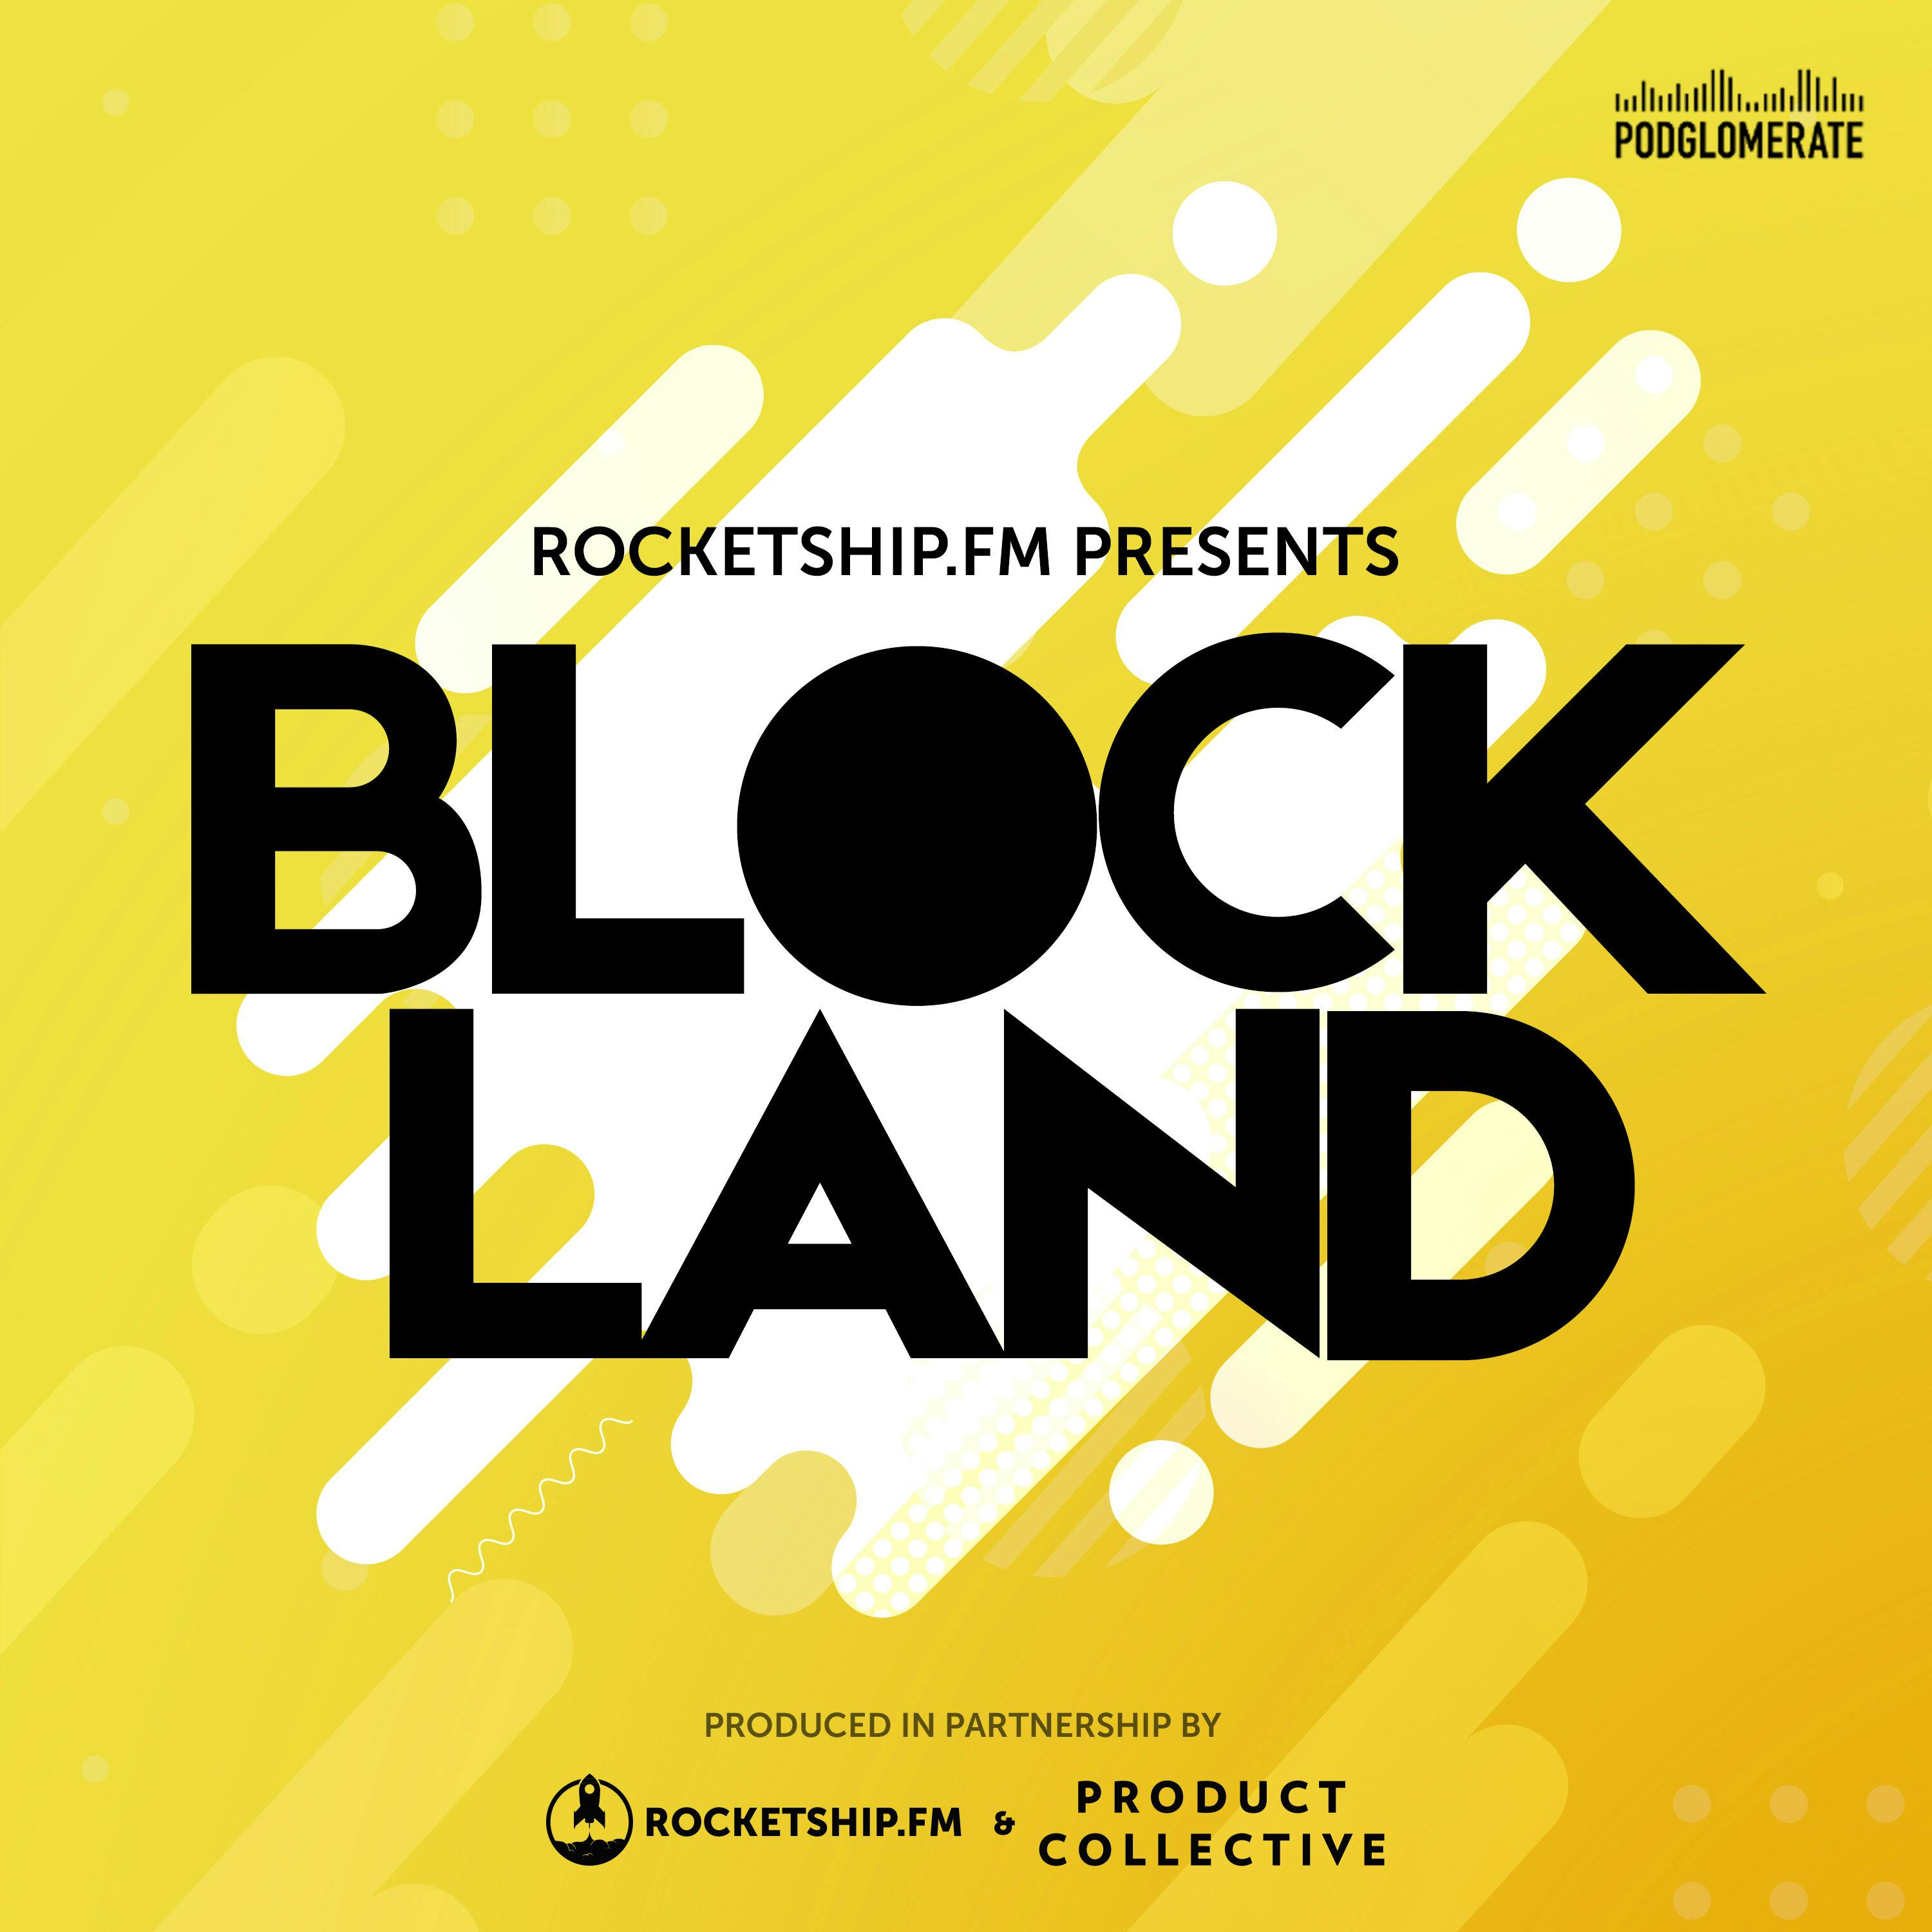 Blockland: The Blockland Conference